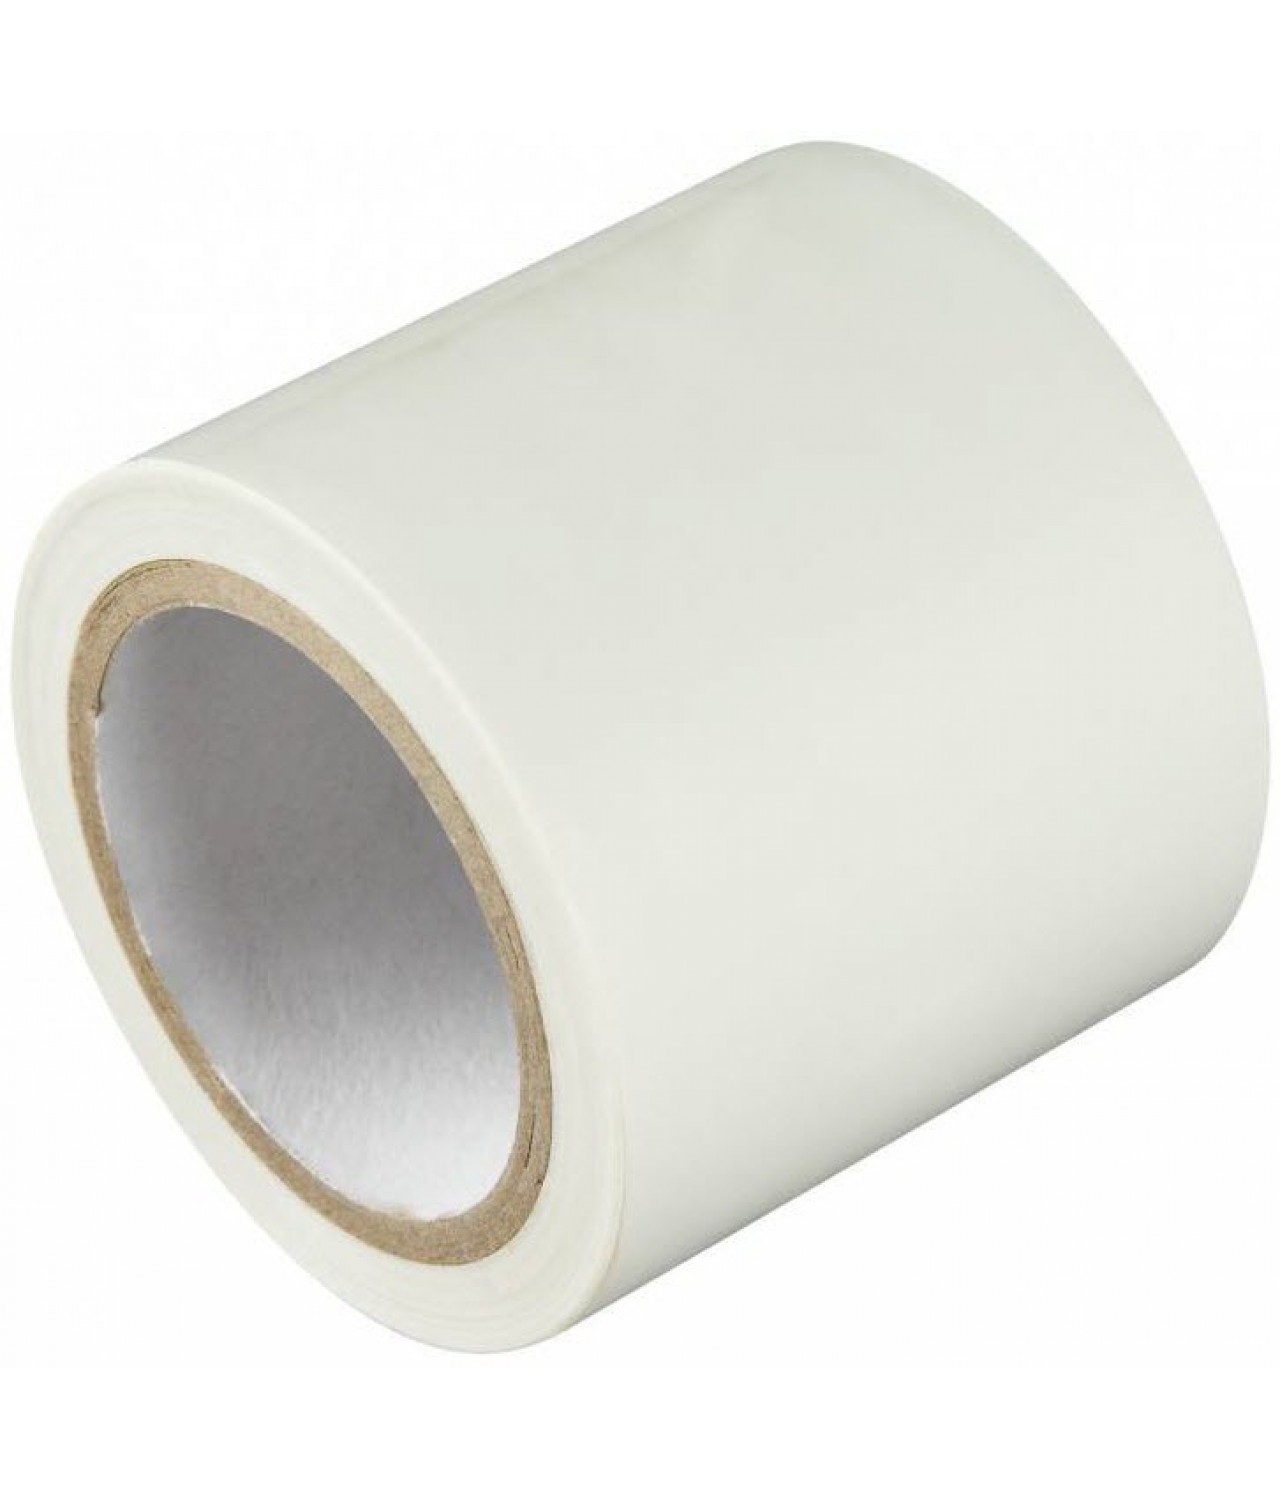 Adhesive PVC tape for plastic ducts sealing, 5.0 cm x 5 m, TAP - image